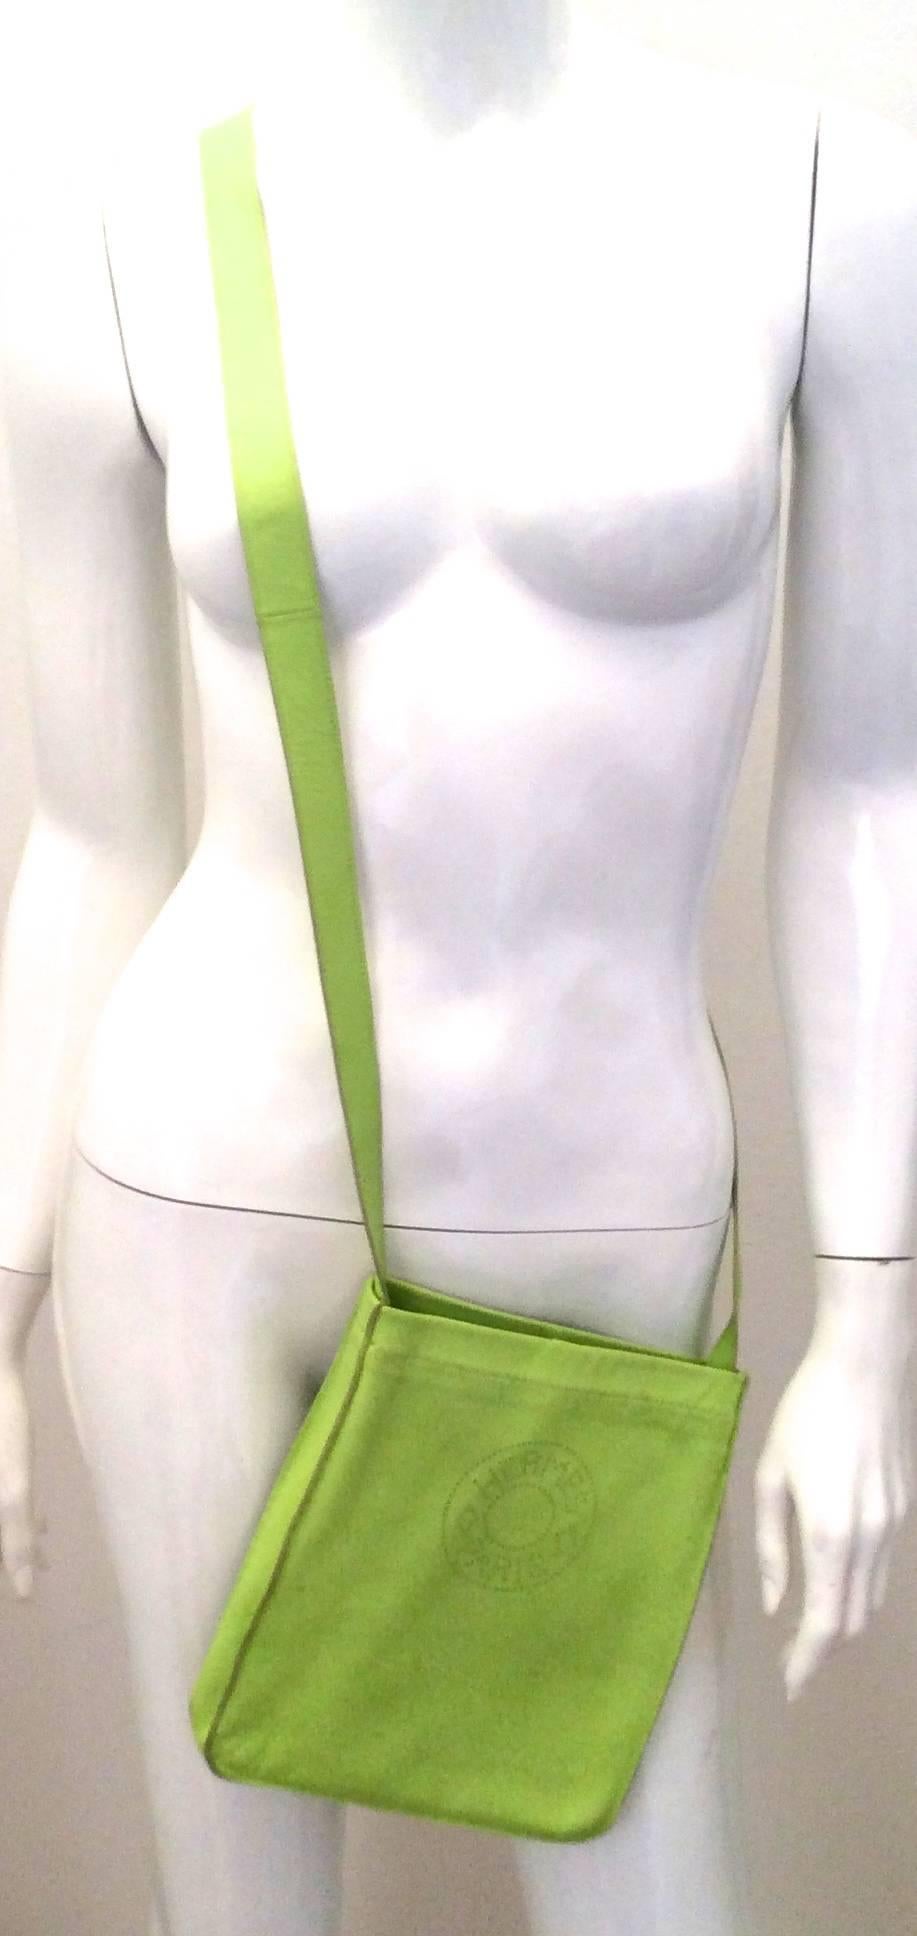 Presented here is a beautiful crossbody bag from Hermes Paris. The style of the bag is called the 'toudou' bag. This model is no longer produced and is extremely rare. Production was stopped in mid-2000's. The front of the bag has a perforated